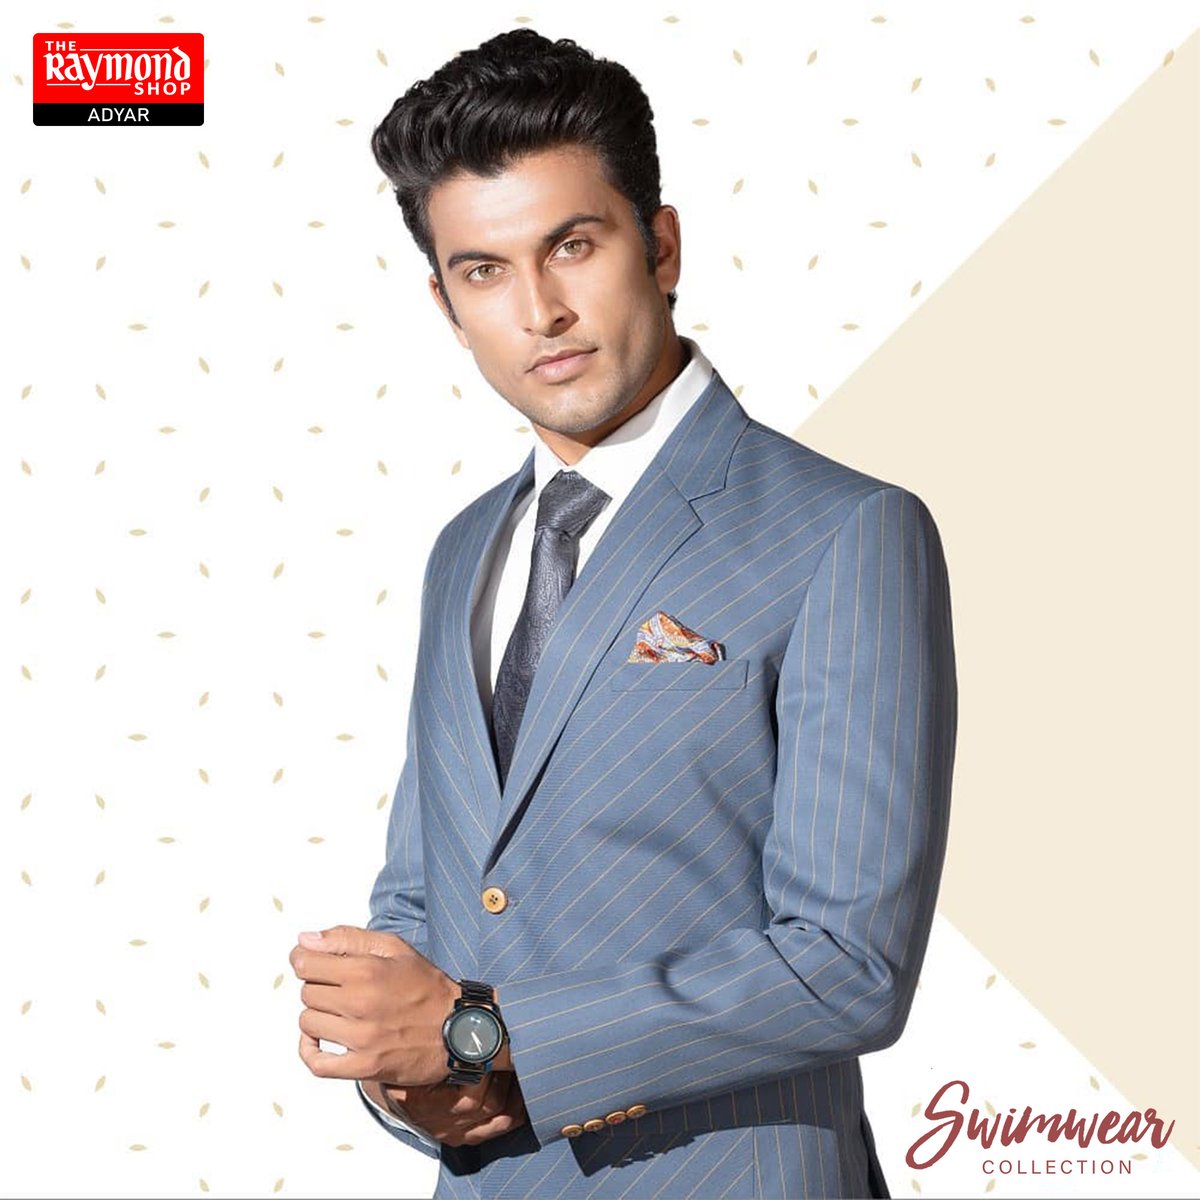 'Stay Cool and Stylish this Summer with Our Latest Suit Collection'
Follow For More Collection :
Facebook: facebook.com/Raymondcustomt…
.
#MensSuit #MensSuiting #SuitUp #MensFashion #MensStyle #SuitStyle  #CustomSuit
#MensWear #ChennaiMenswear
#SuitPants #SuitStore #ChennaiWeddings